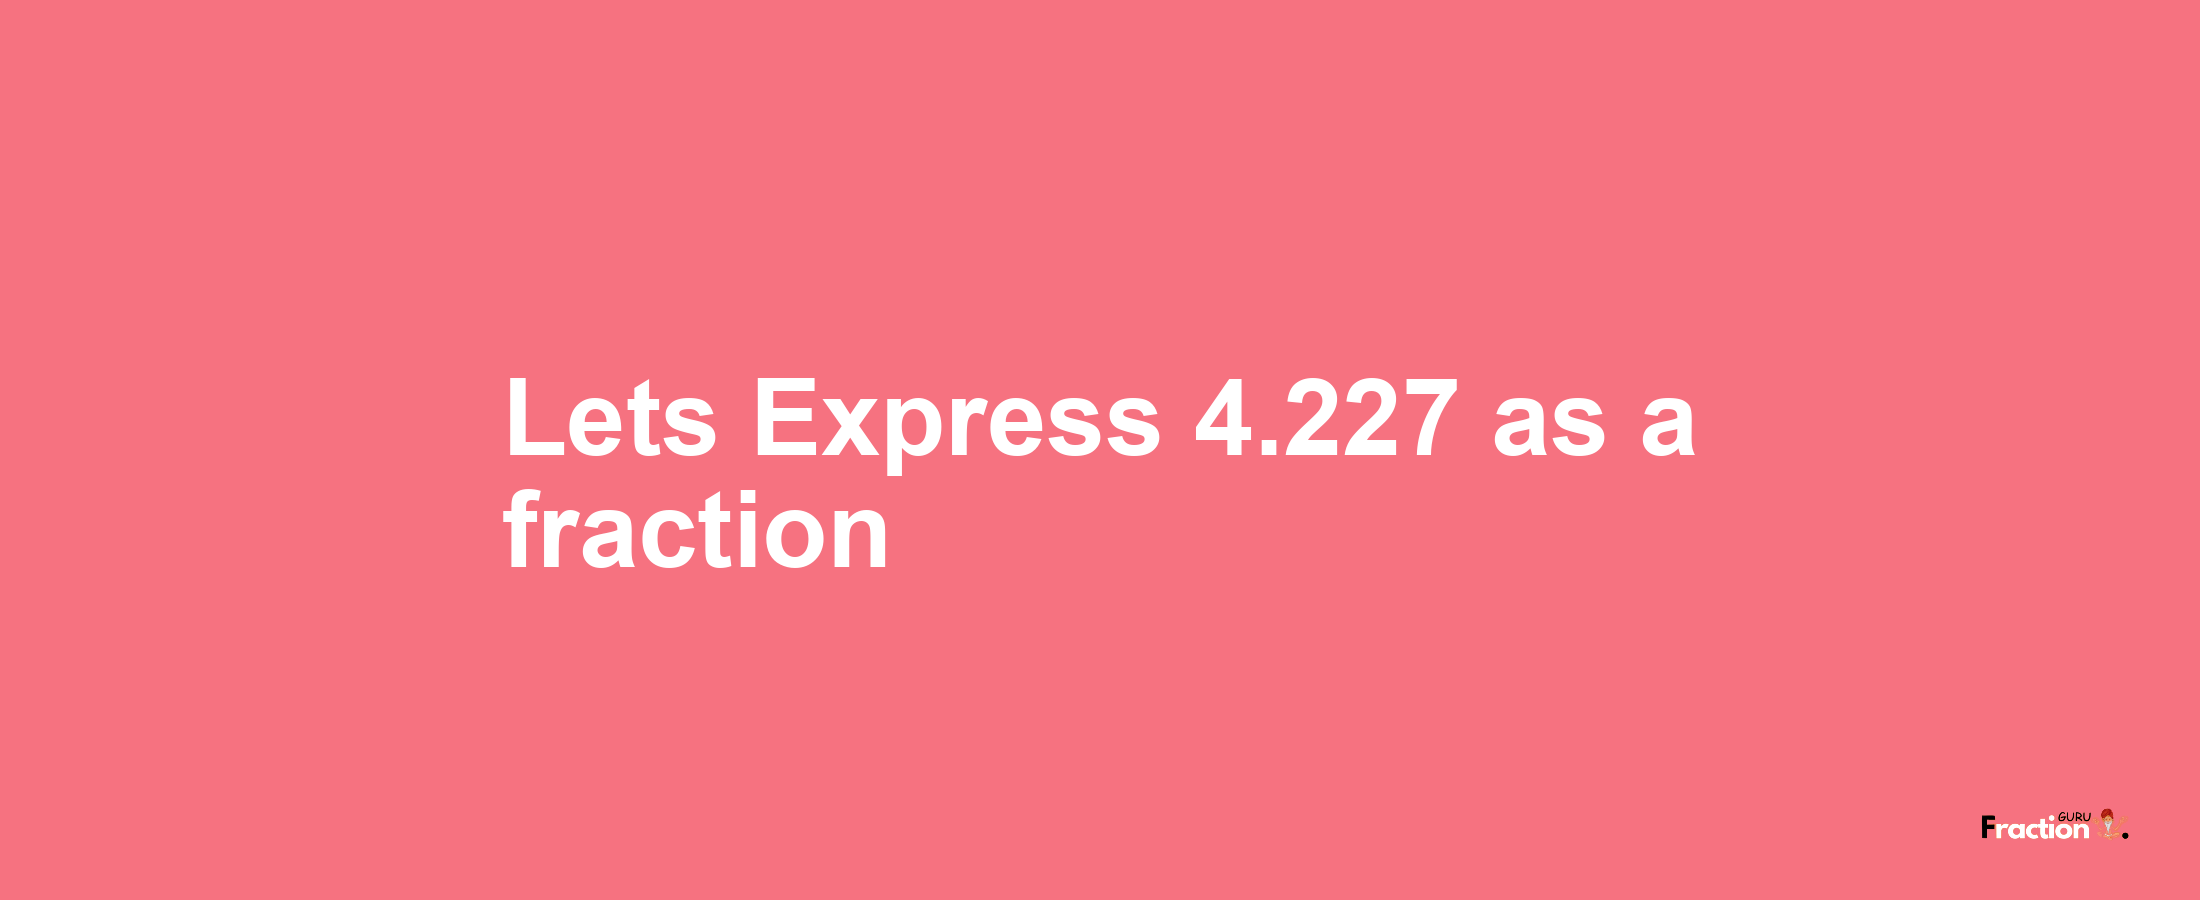 Lets Express 4.227 as afraction